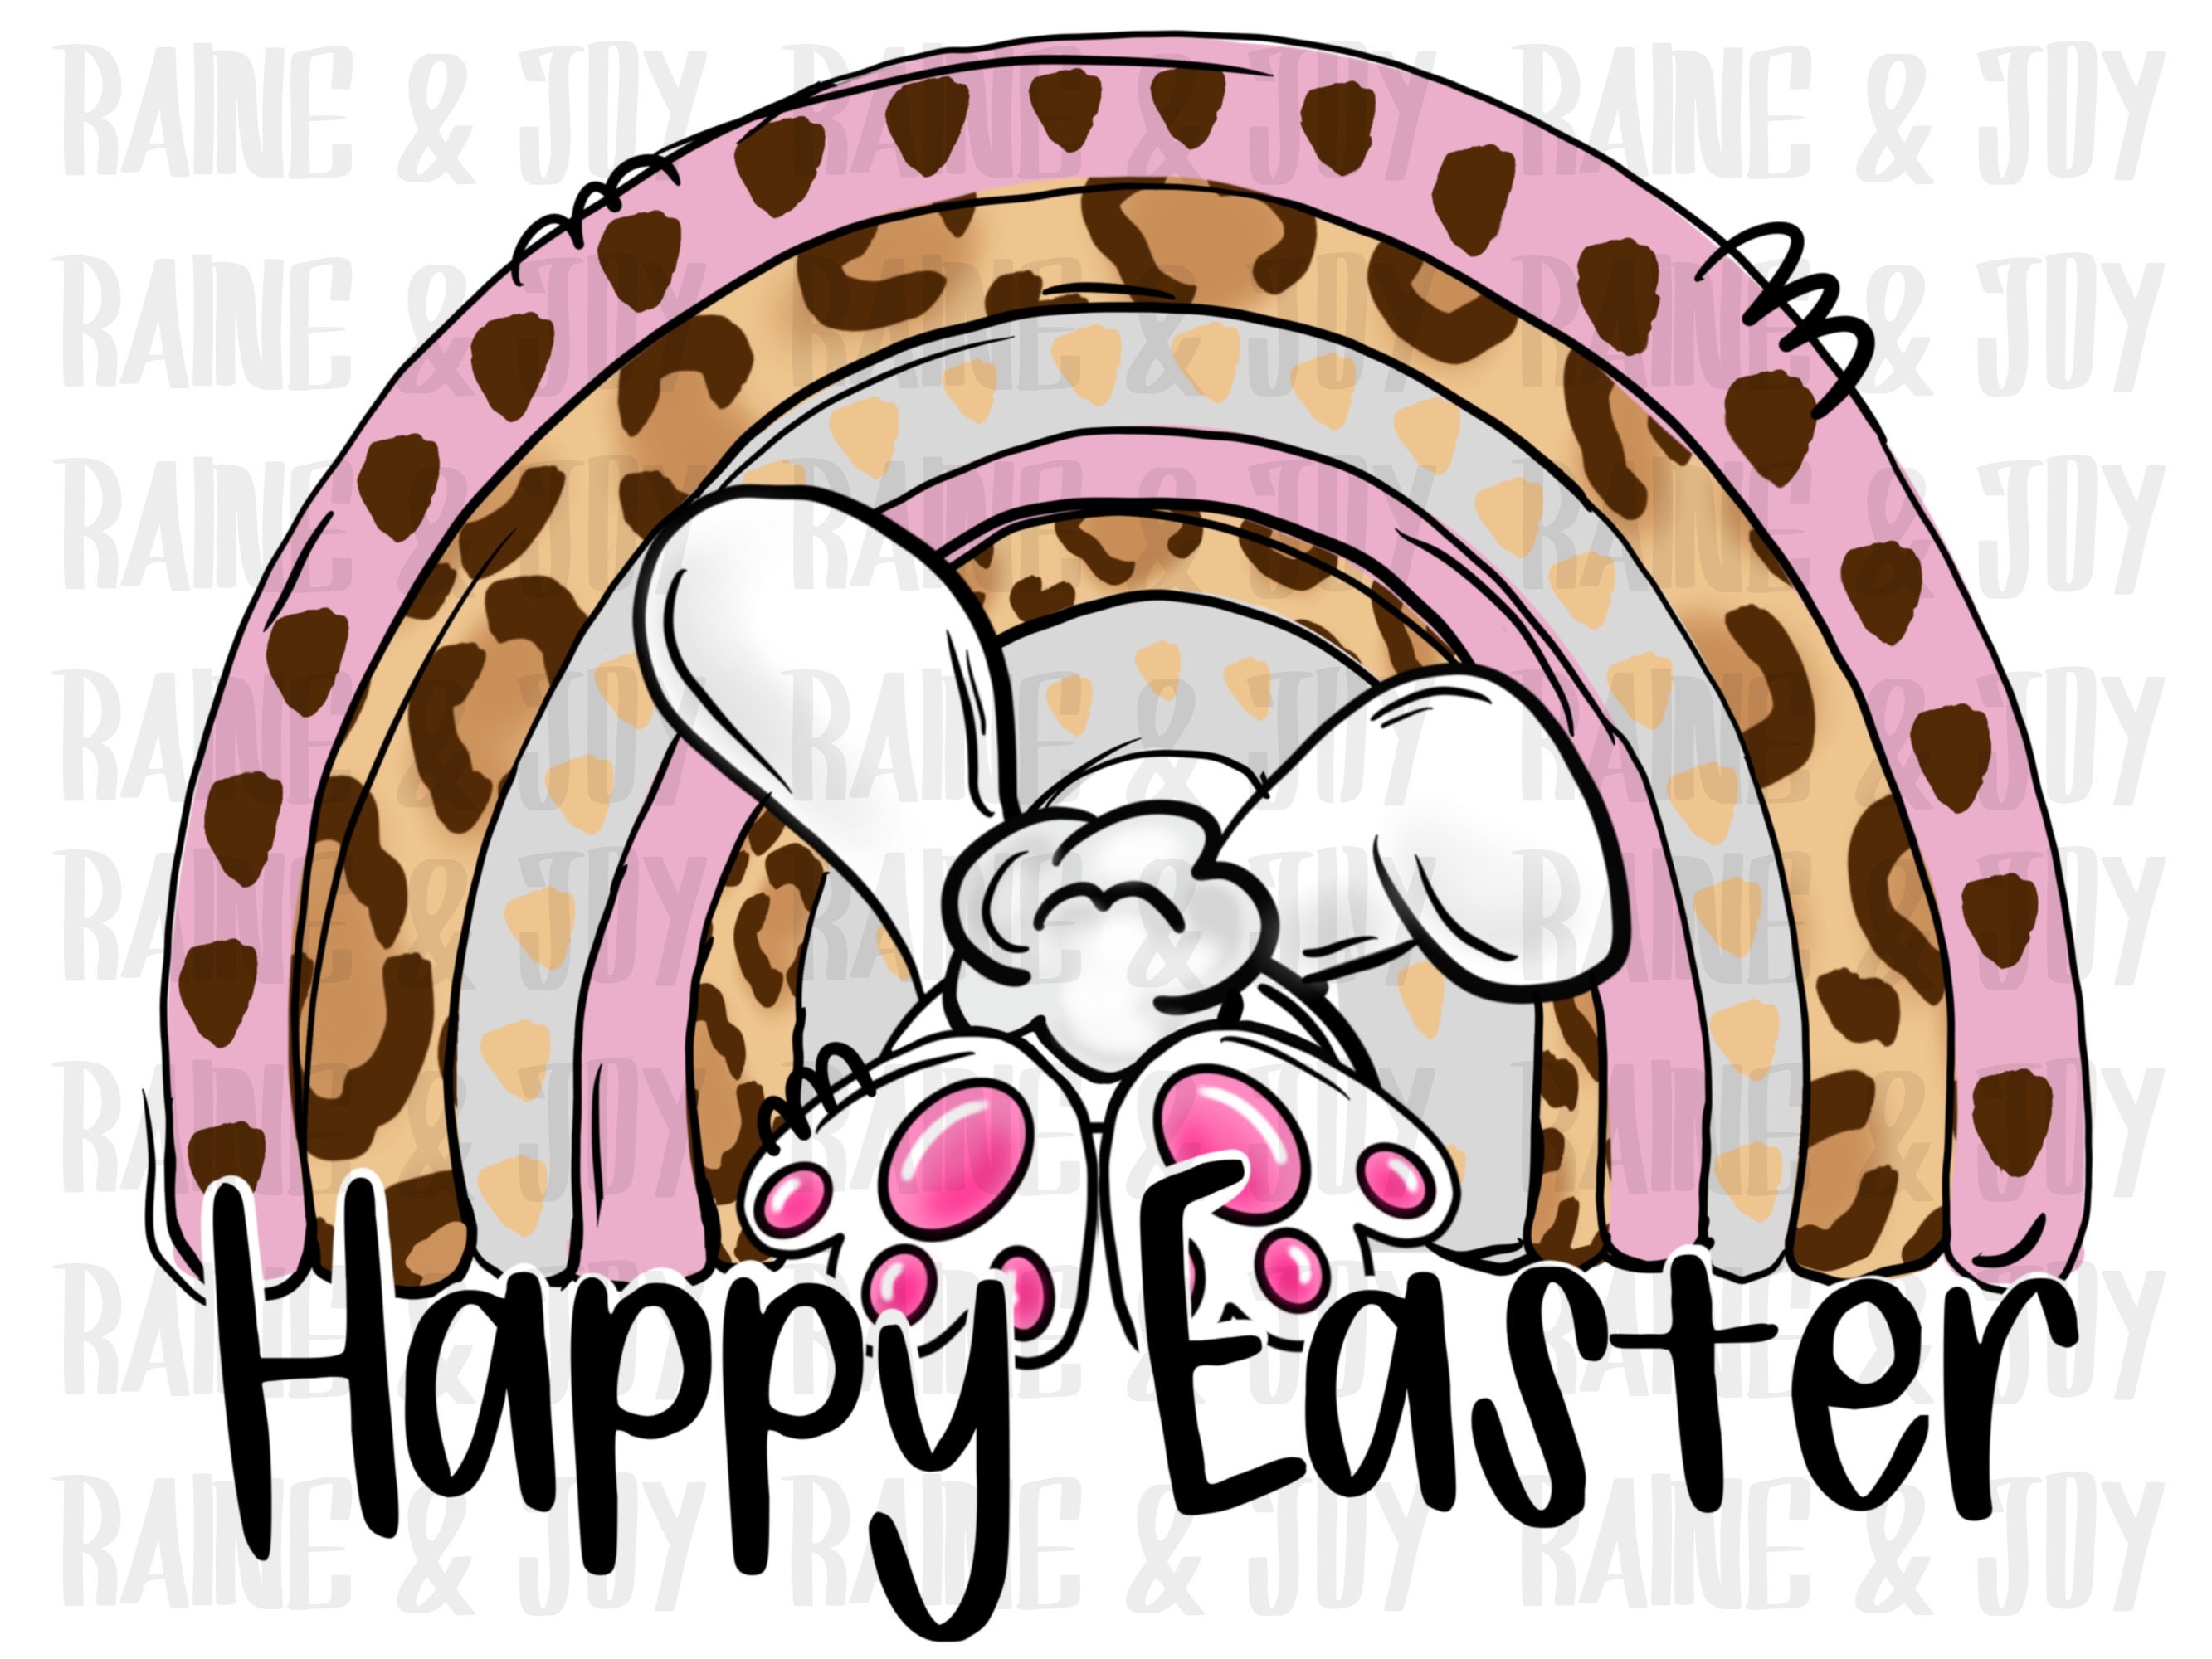 Happy Easter PnG Easter PnG Printable Instant Download PNG Hoppy Easter PNG for Sublimation Bunny PnG Hop PnG Easter PnG